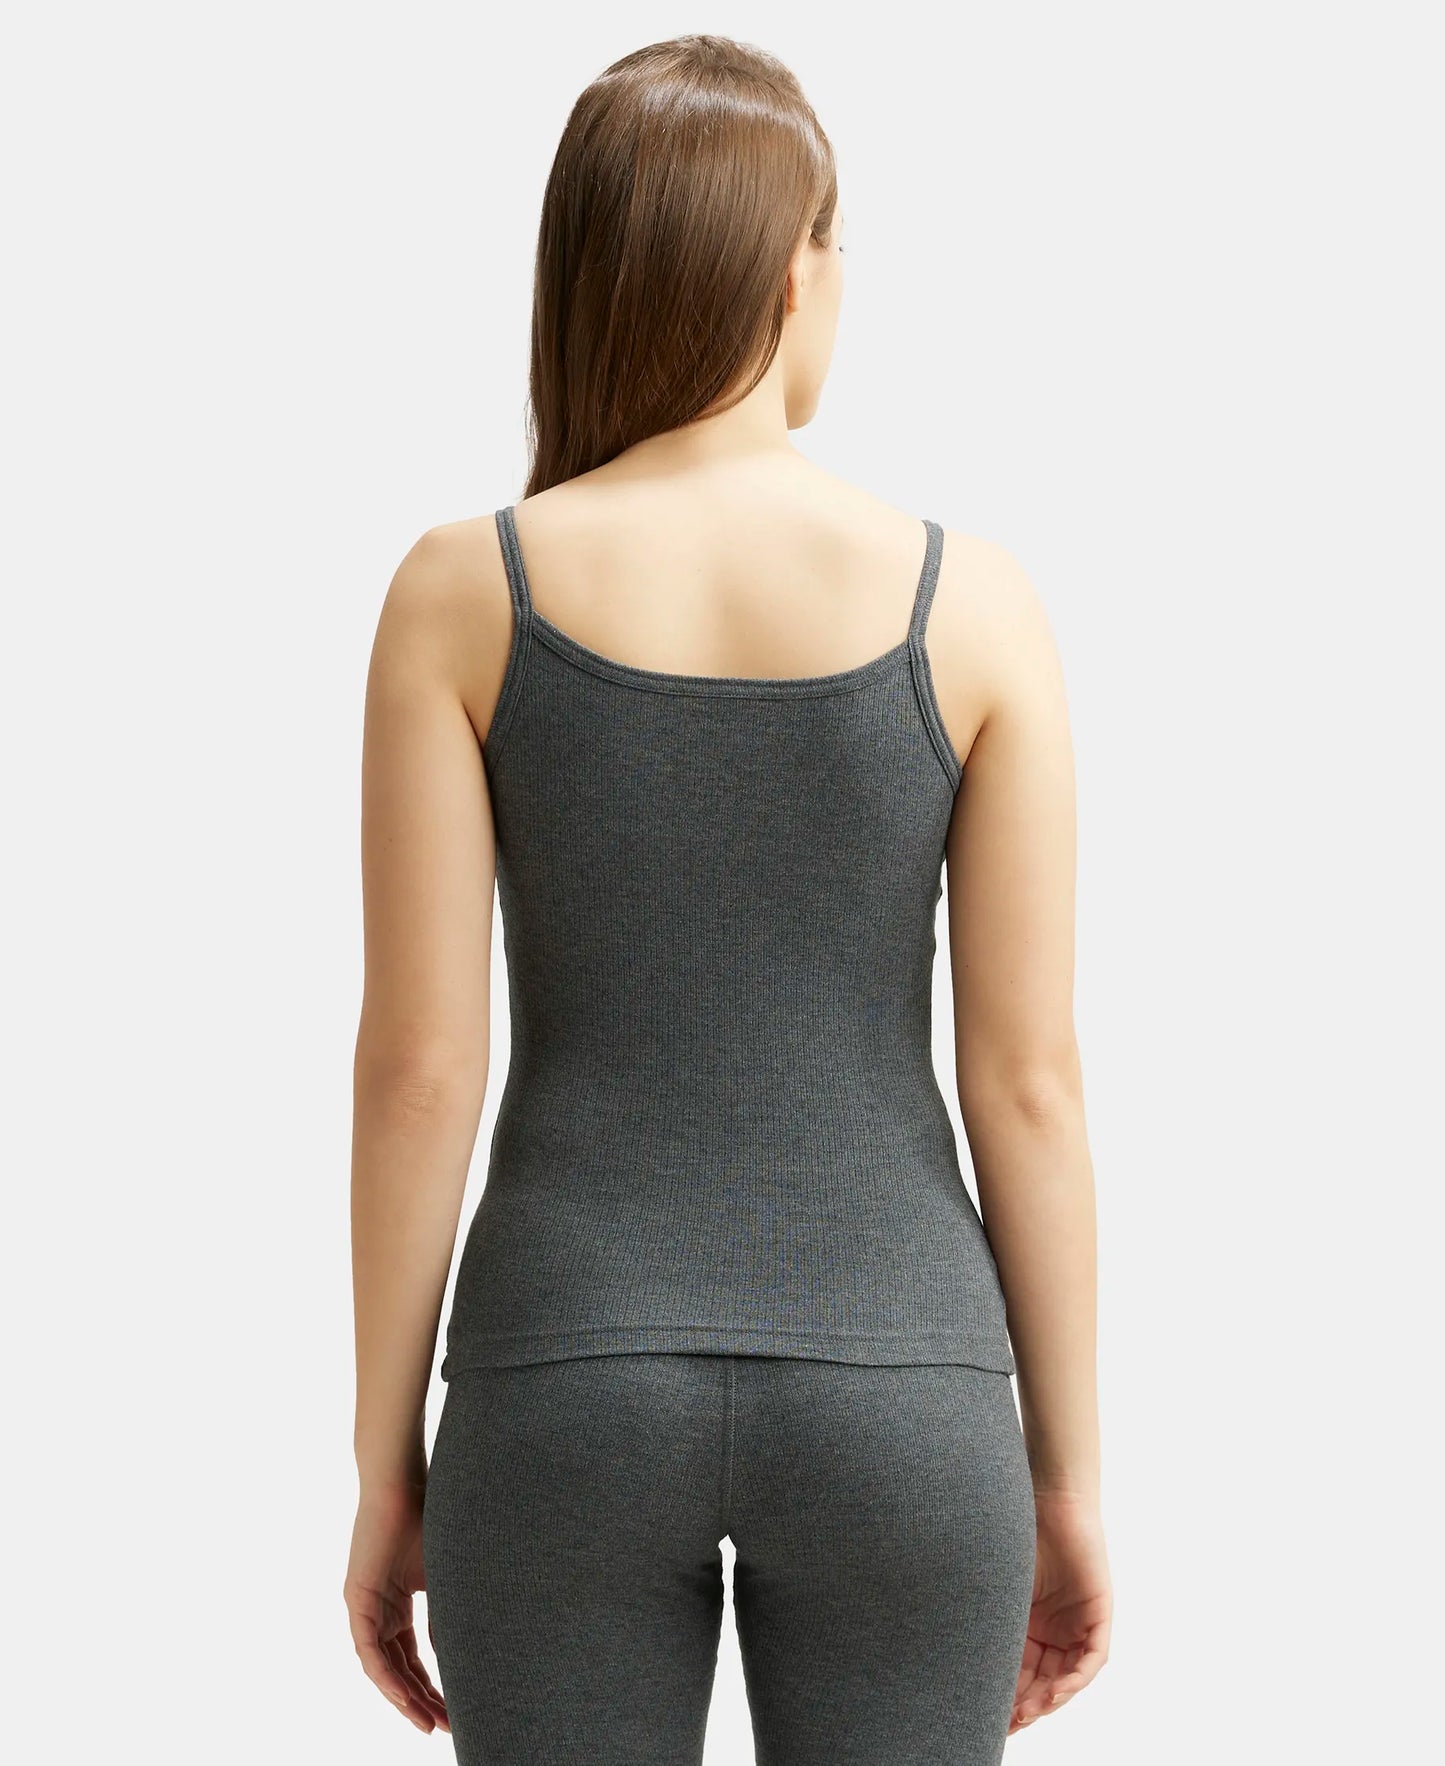 Super Combed Cotton Rich Thermal Camisole with StayWarm Technology - Charcoal Melange-3